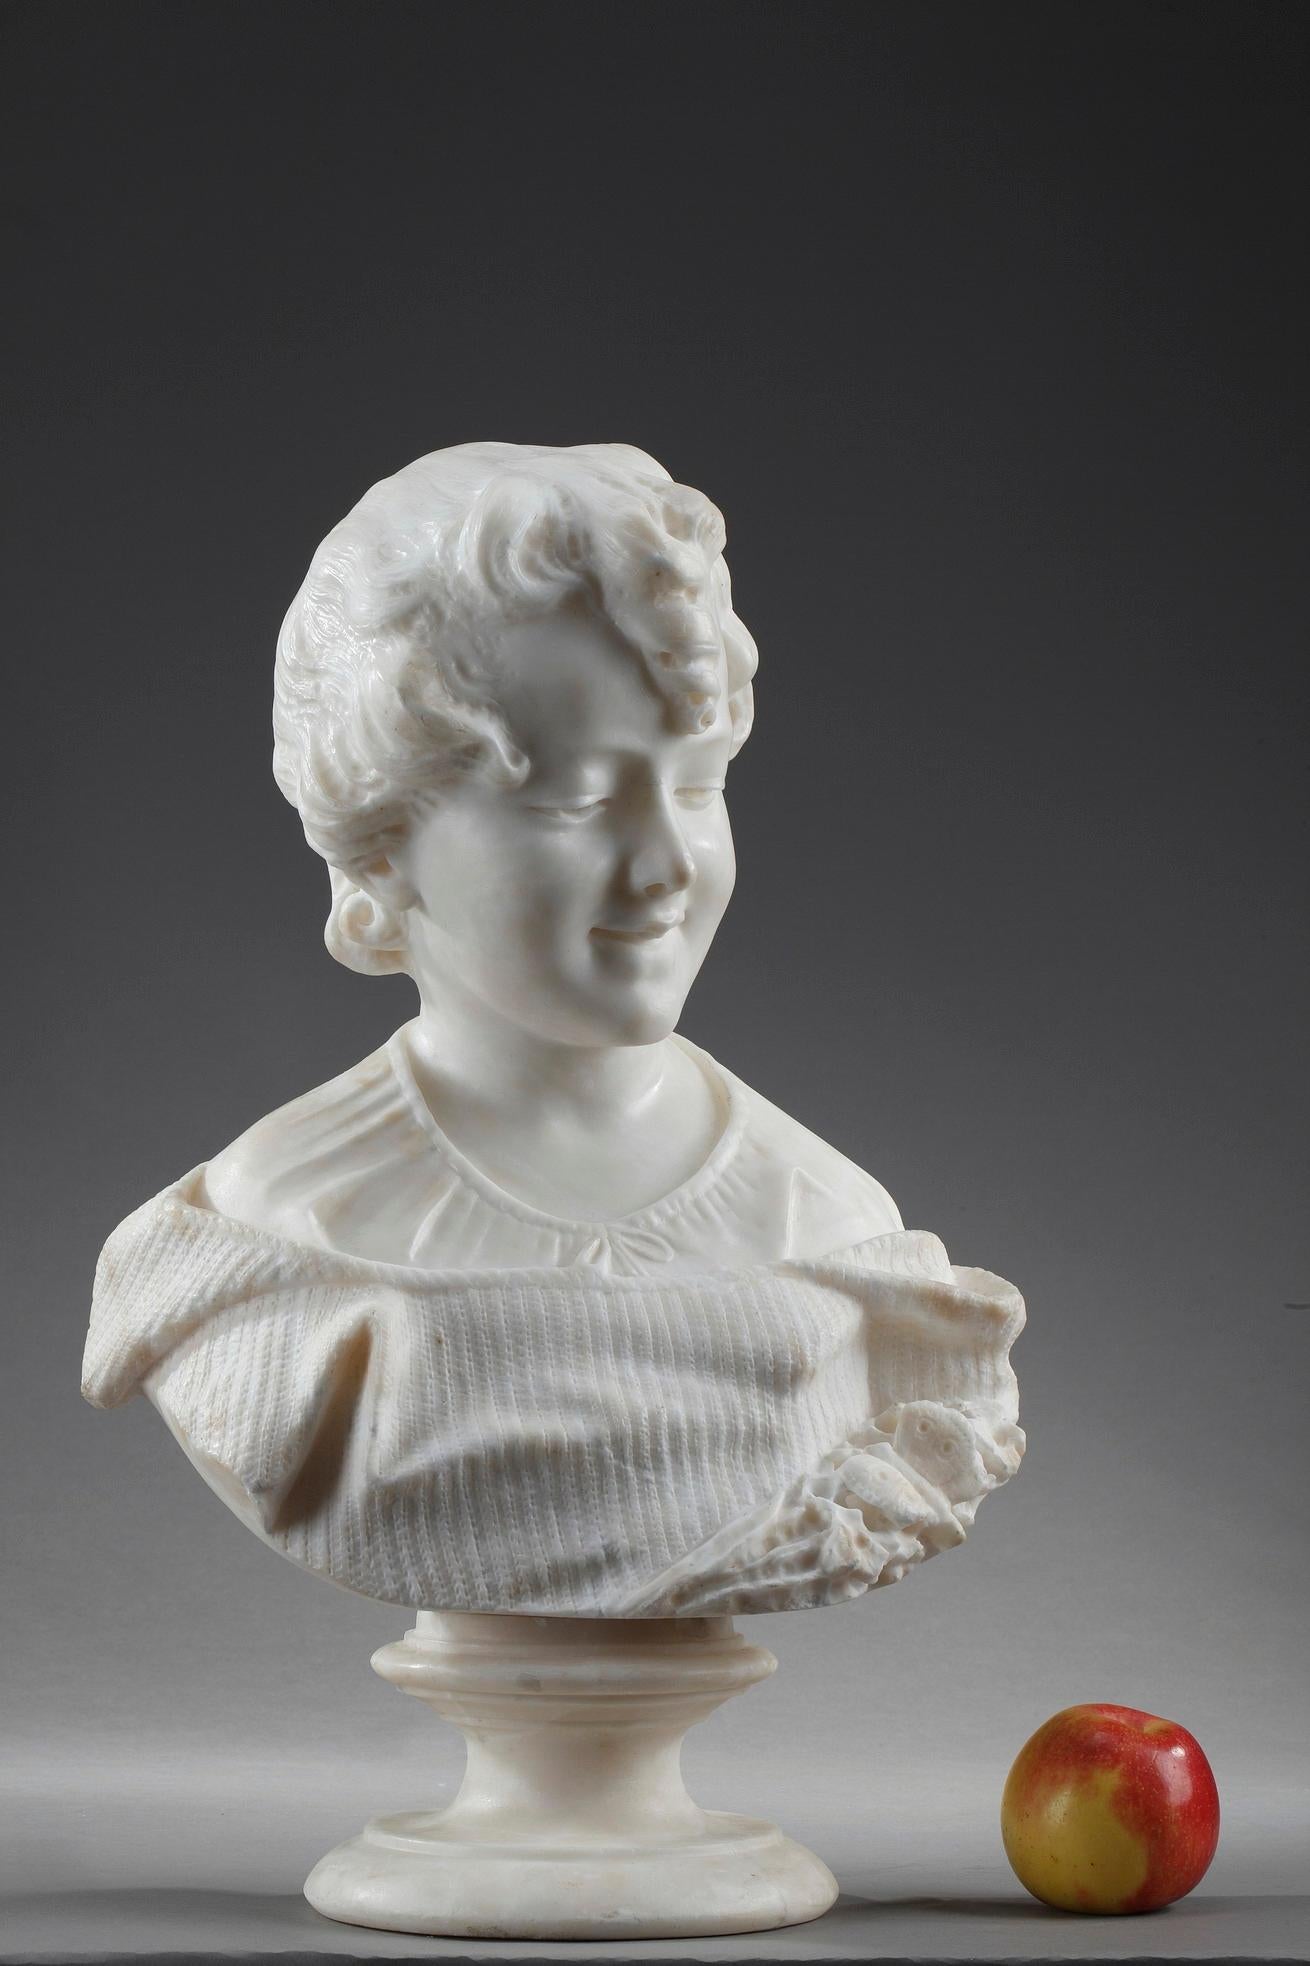 Alabaster sculpture depicting the portrait of a young girl in the taste of Albert-Ernest Carrier-Belleuse, (1824-1887). She is wearing a striped garment decorated with a butterfly that gathers flowers. The texture of her garment is very realistic.